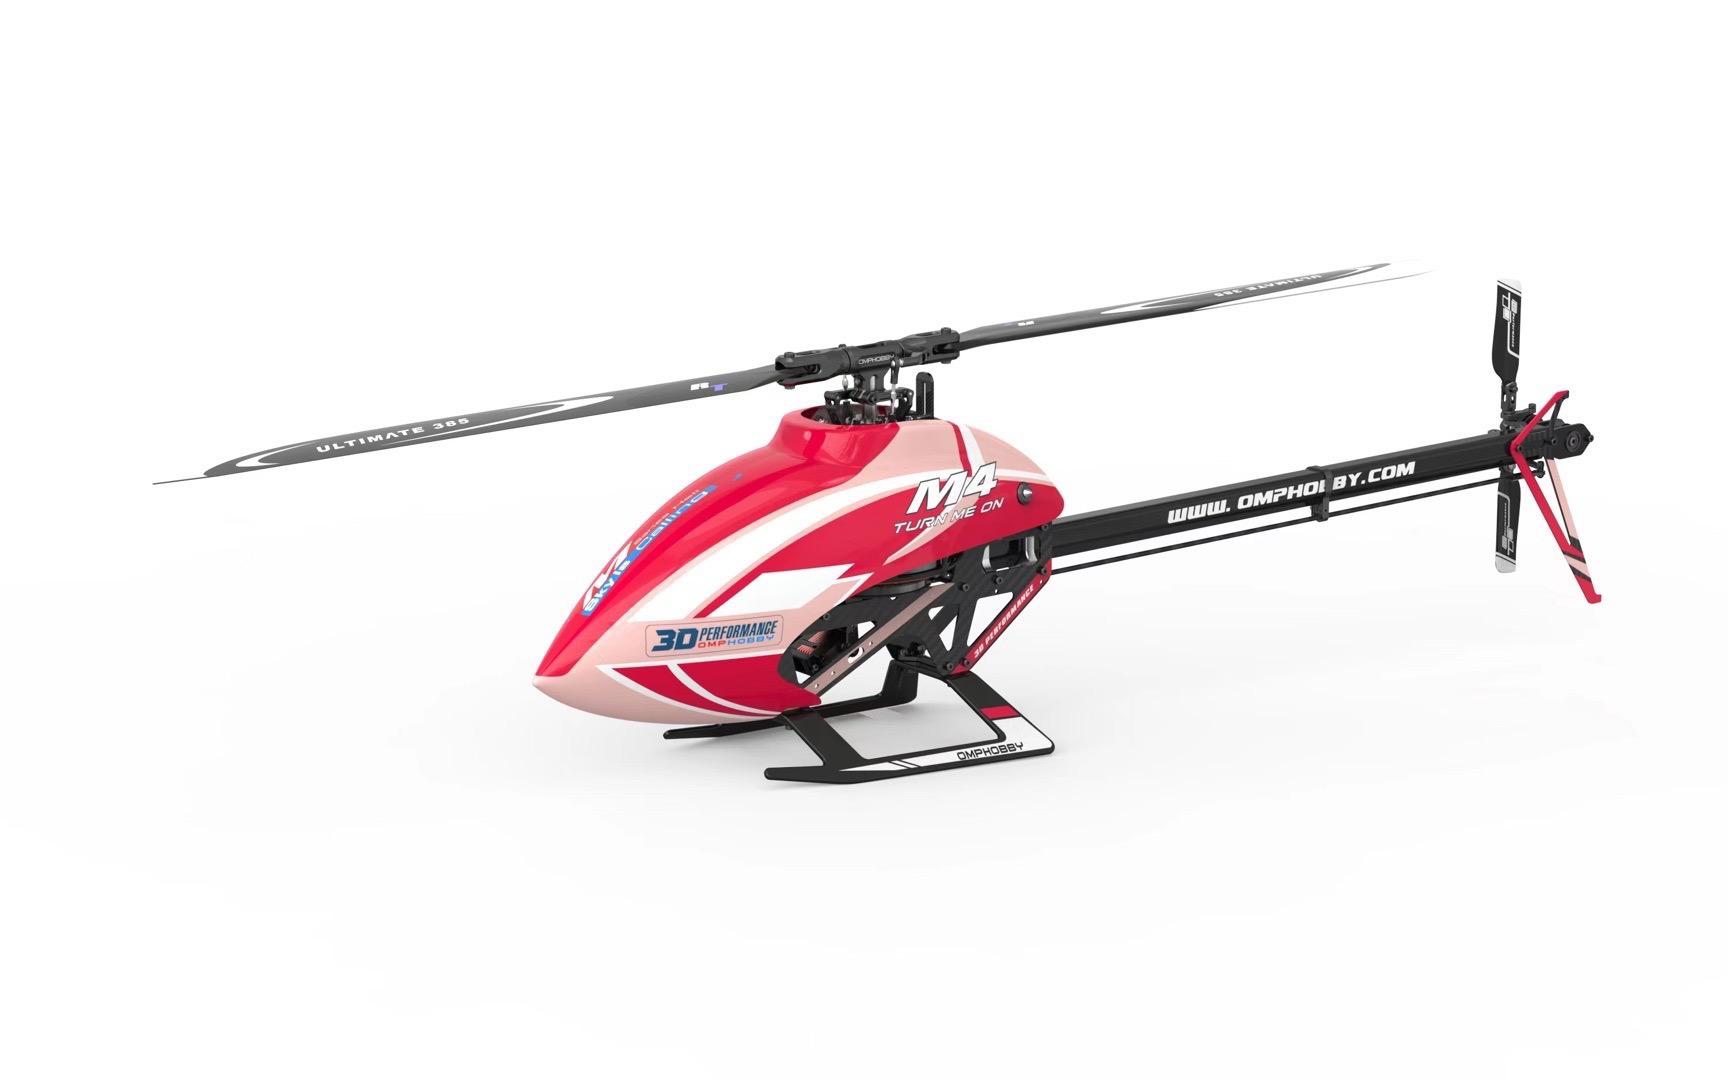 Omphobby Helicopter: High Quality and Innovative Design